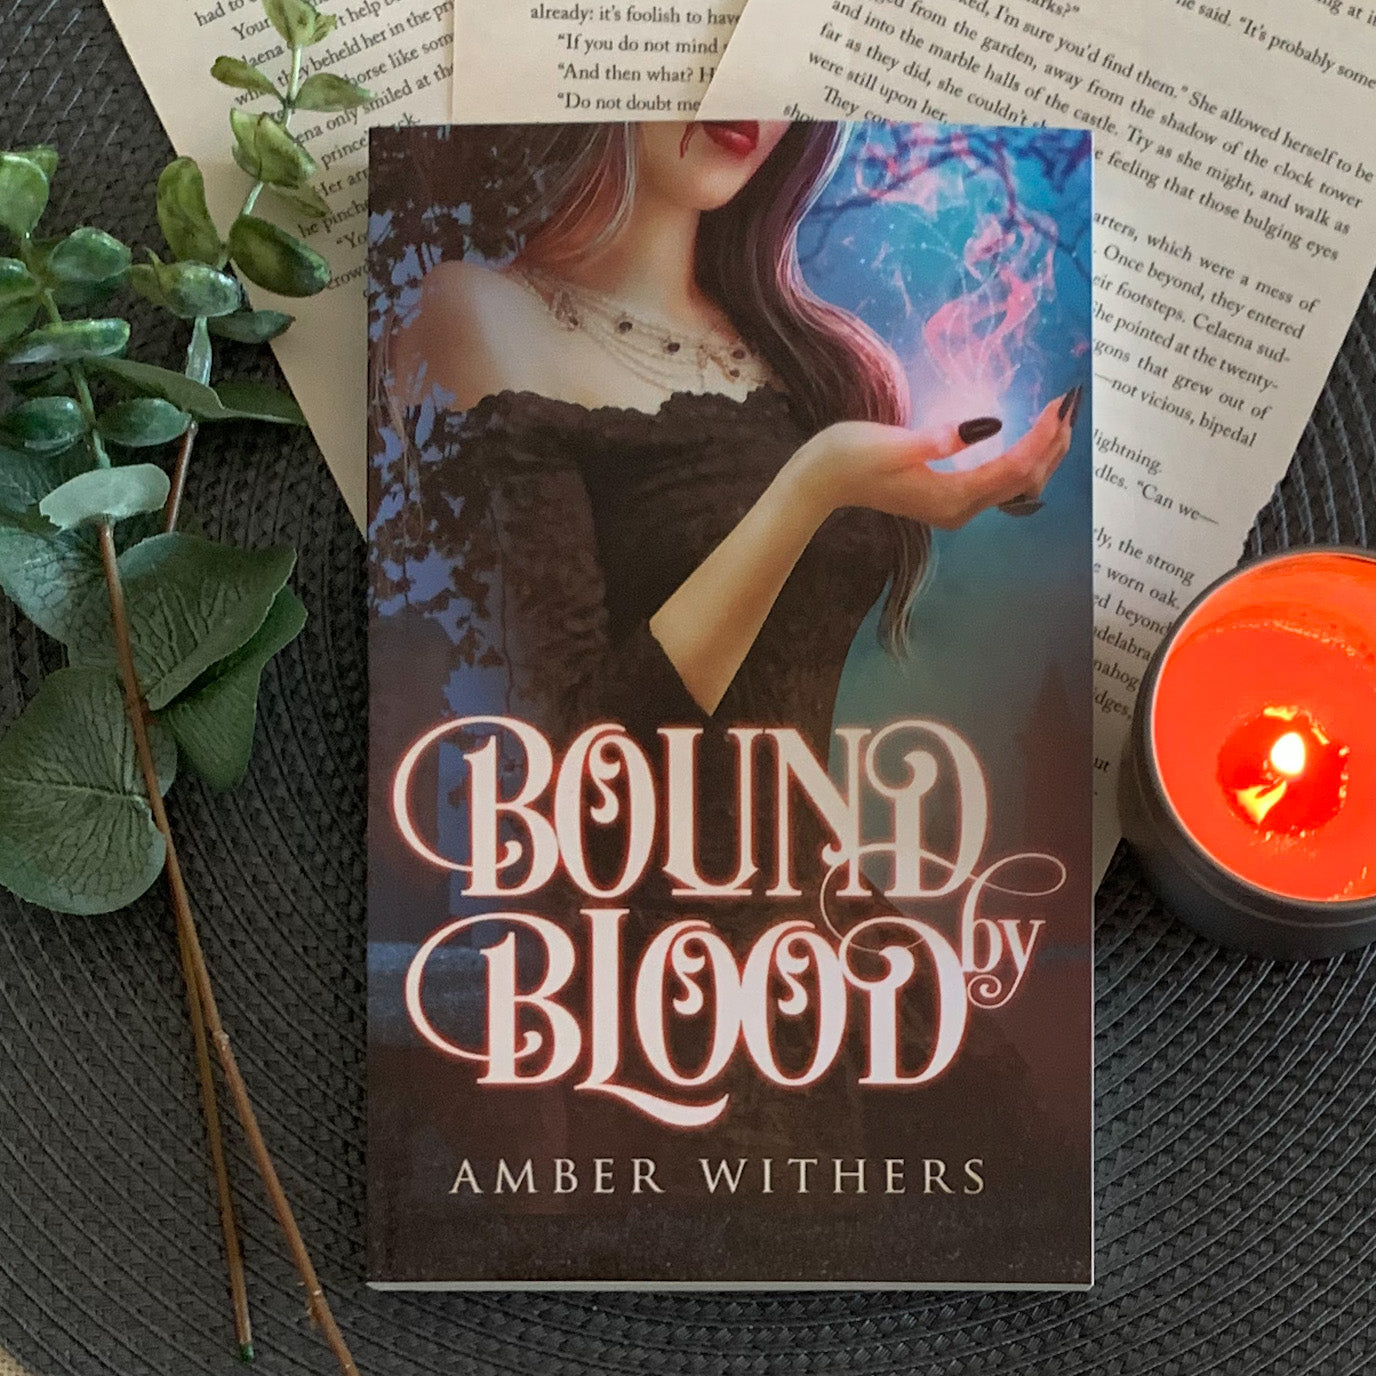 Bound by Blood by Amber Withers